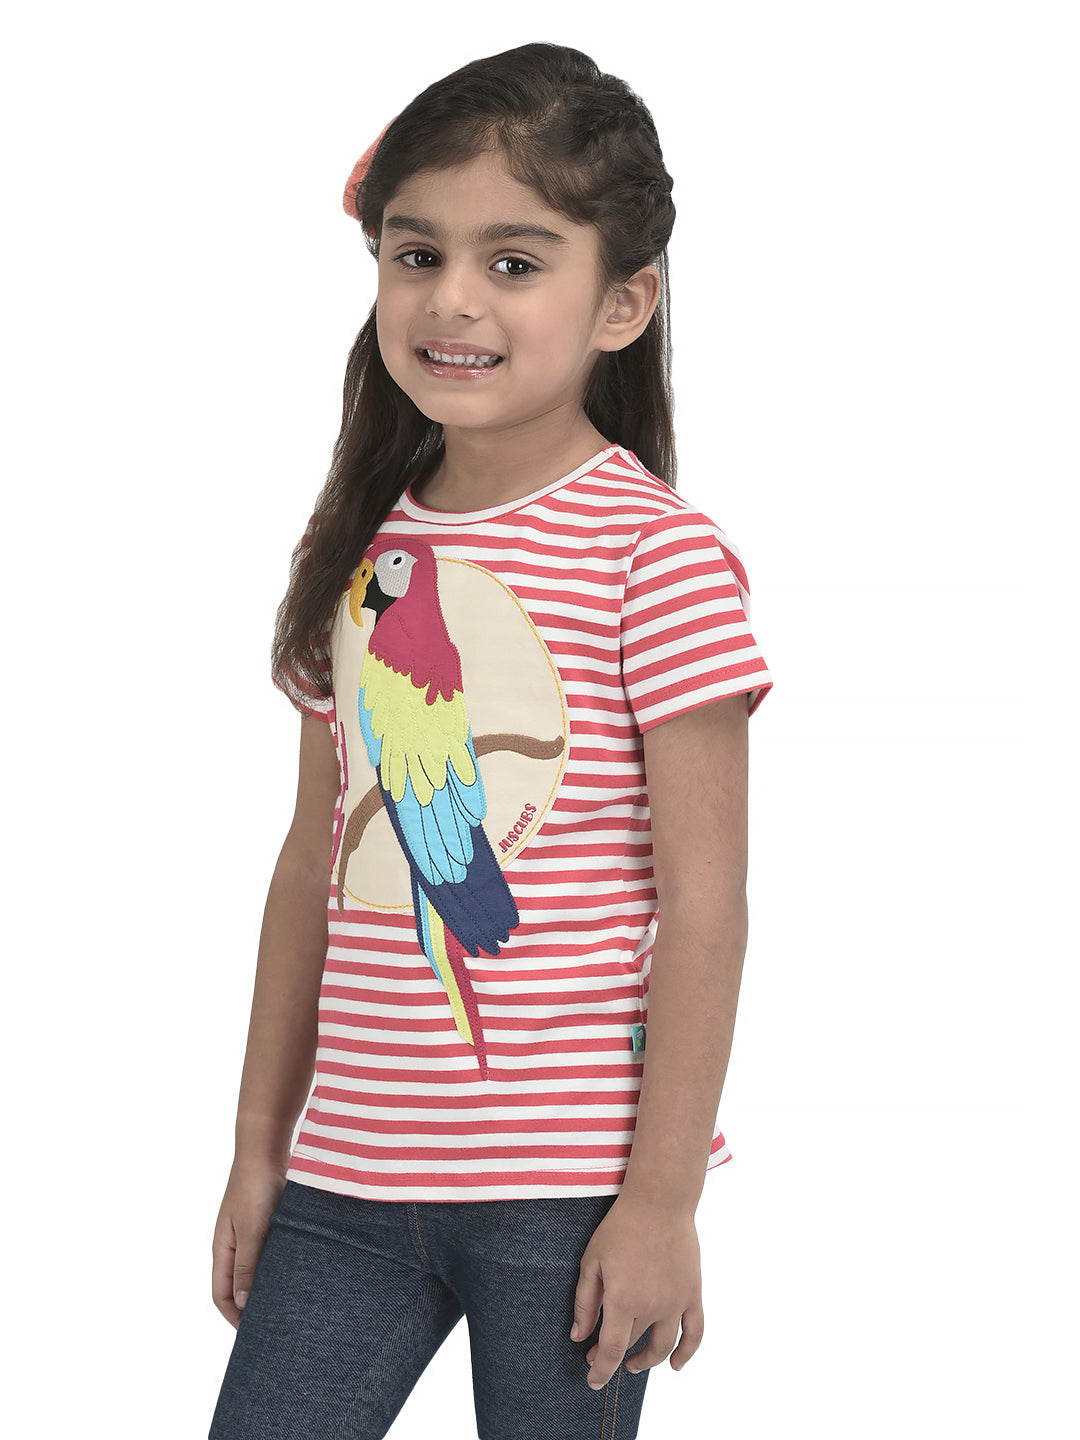 Girls Embroidery & Patch work Parrot Bio-Washed T-shirt - Pink & Navy